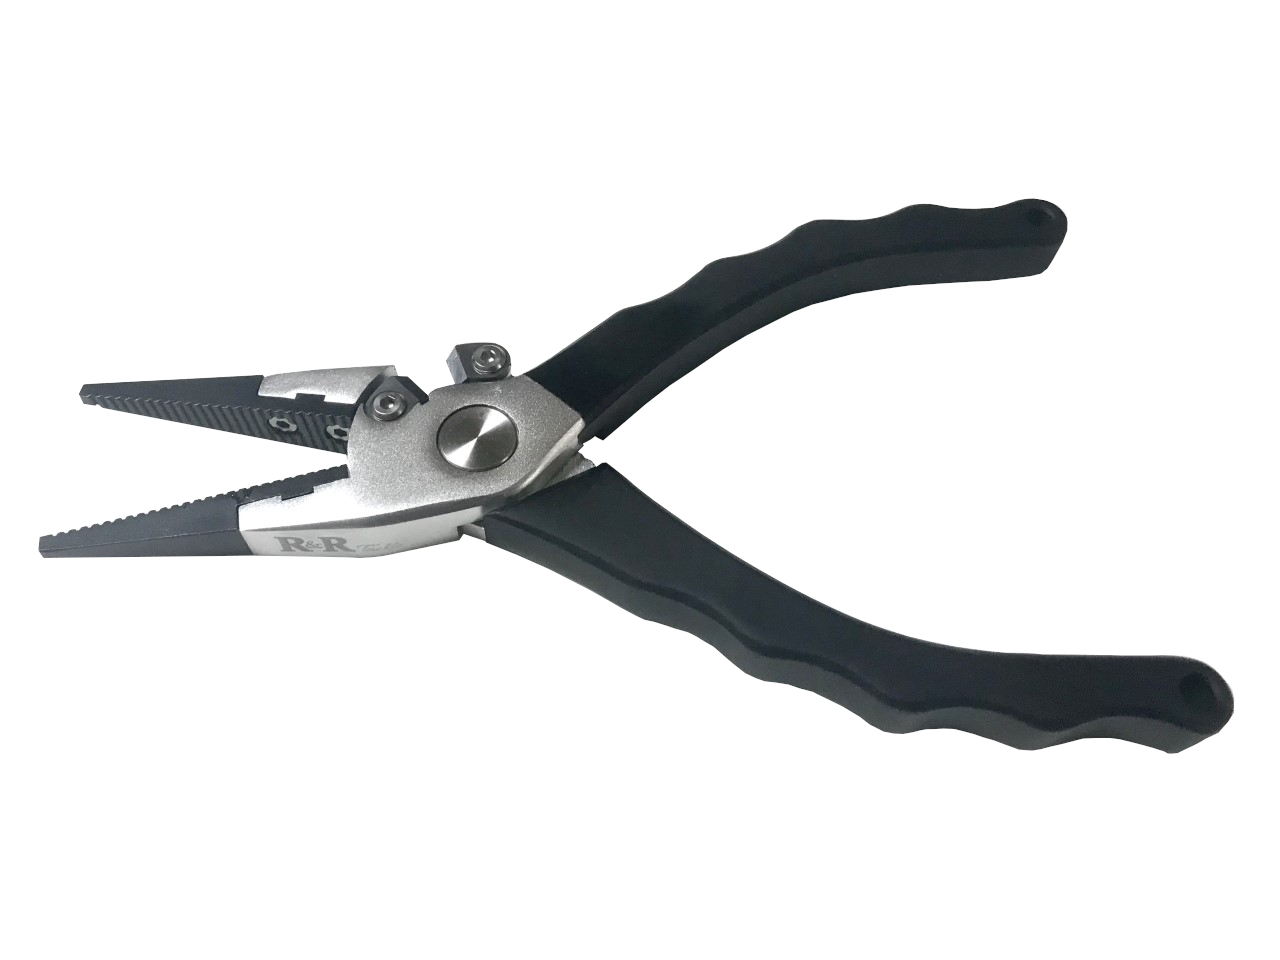 R&R PL1 Aluminum/Stainless SteelFishing Pliers/Tungsten Carbide